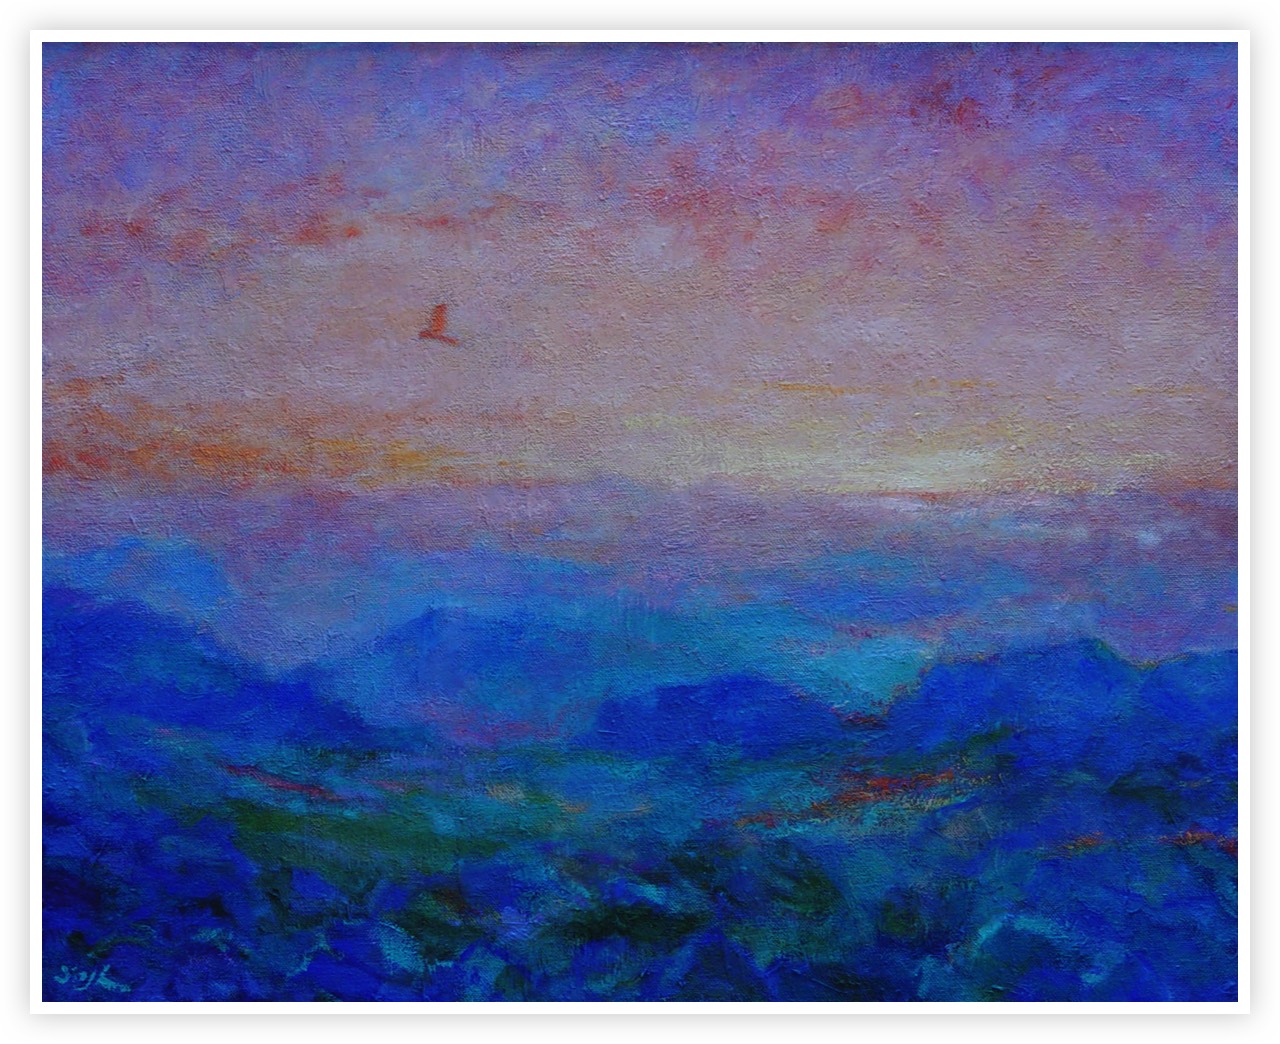 Hawk on Ruberslaw - oil on canvas - 25inches X 20inches - available on request